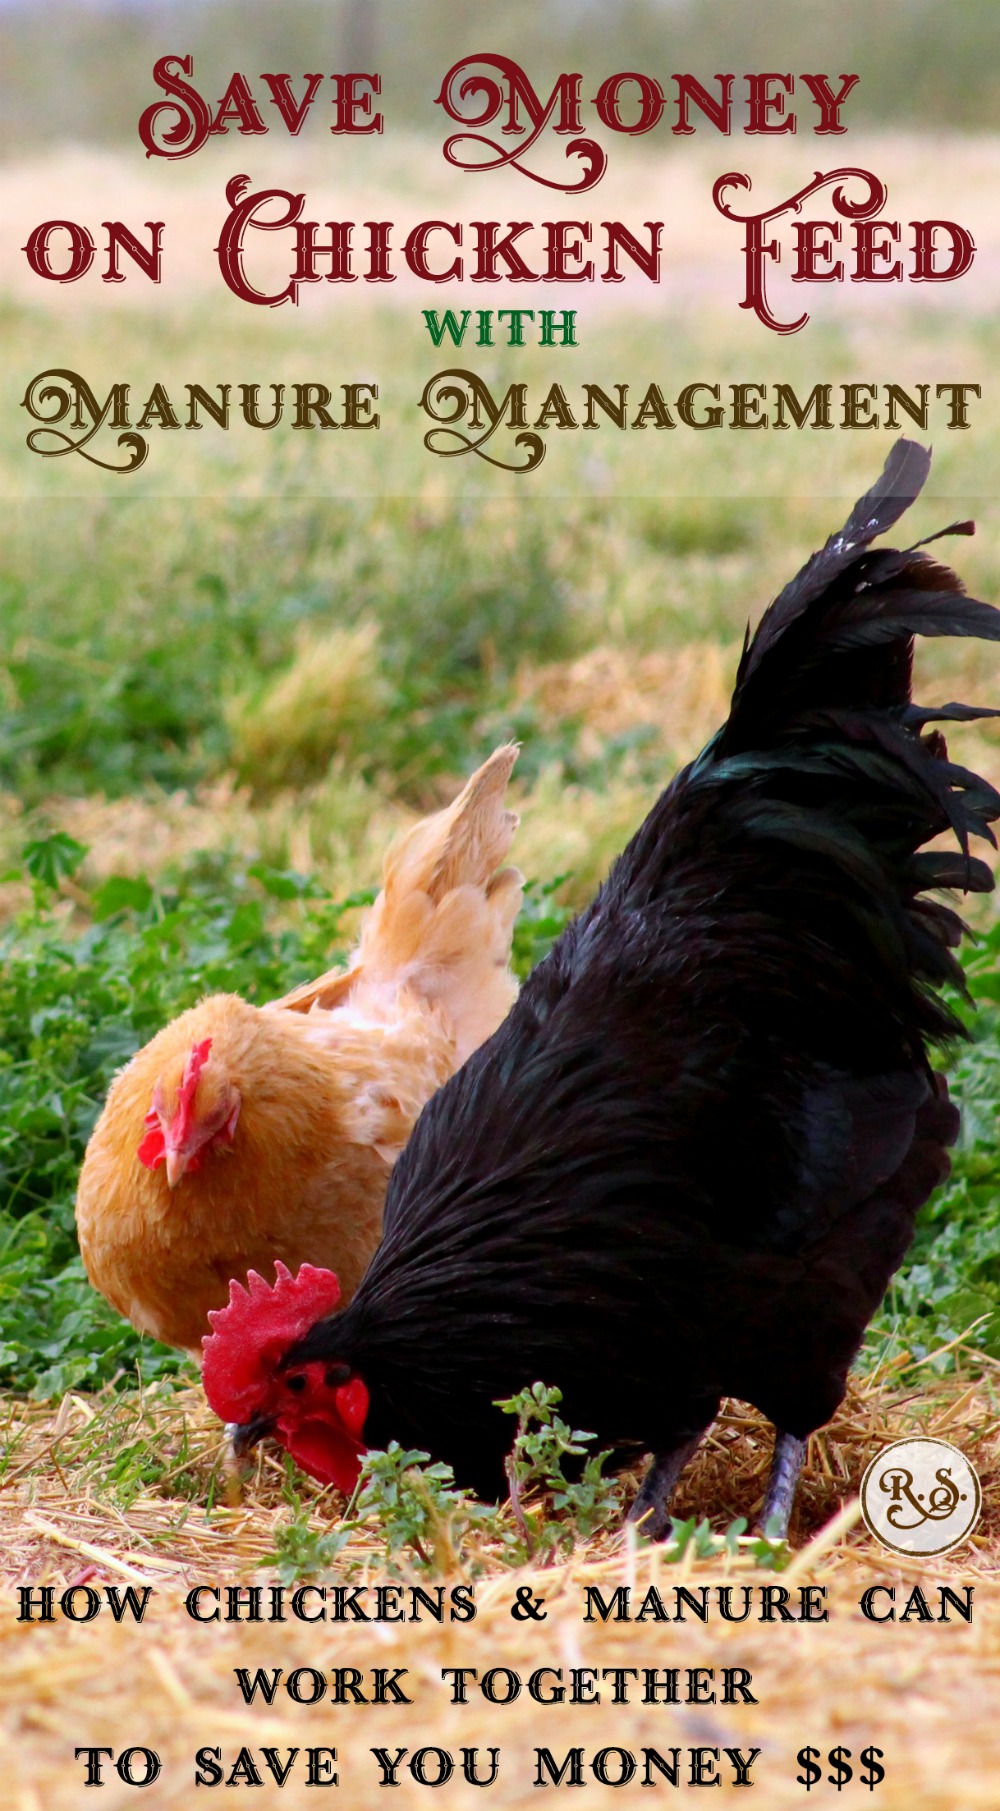 Save money on chicken feed with these easy manure management tips. Free food for the chickens--bugs, compost, worms, etc, ready for you to utilize. Health-promoting & easy DIY ideas for your backyard.